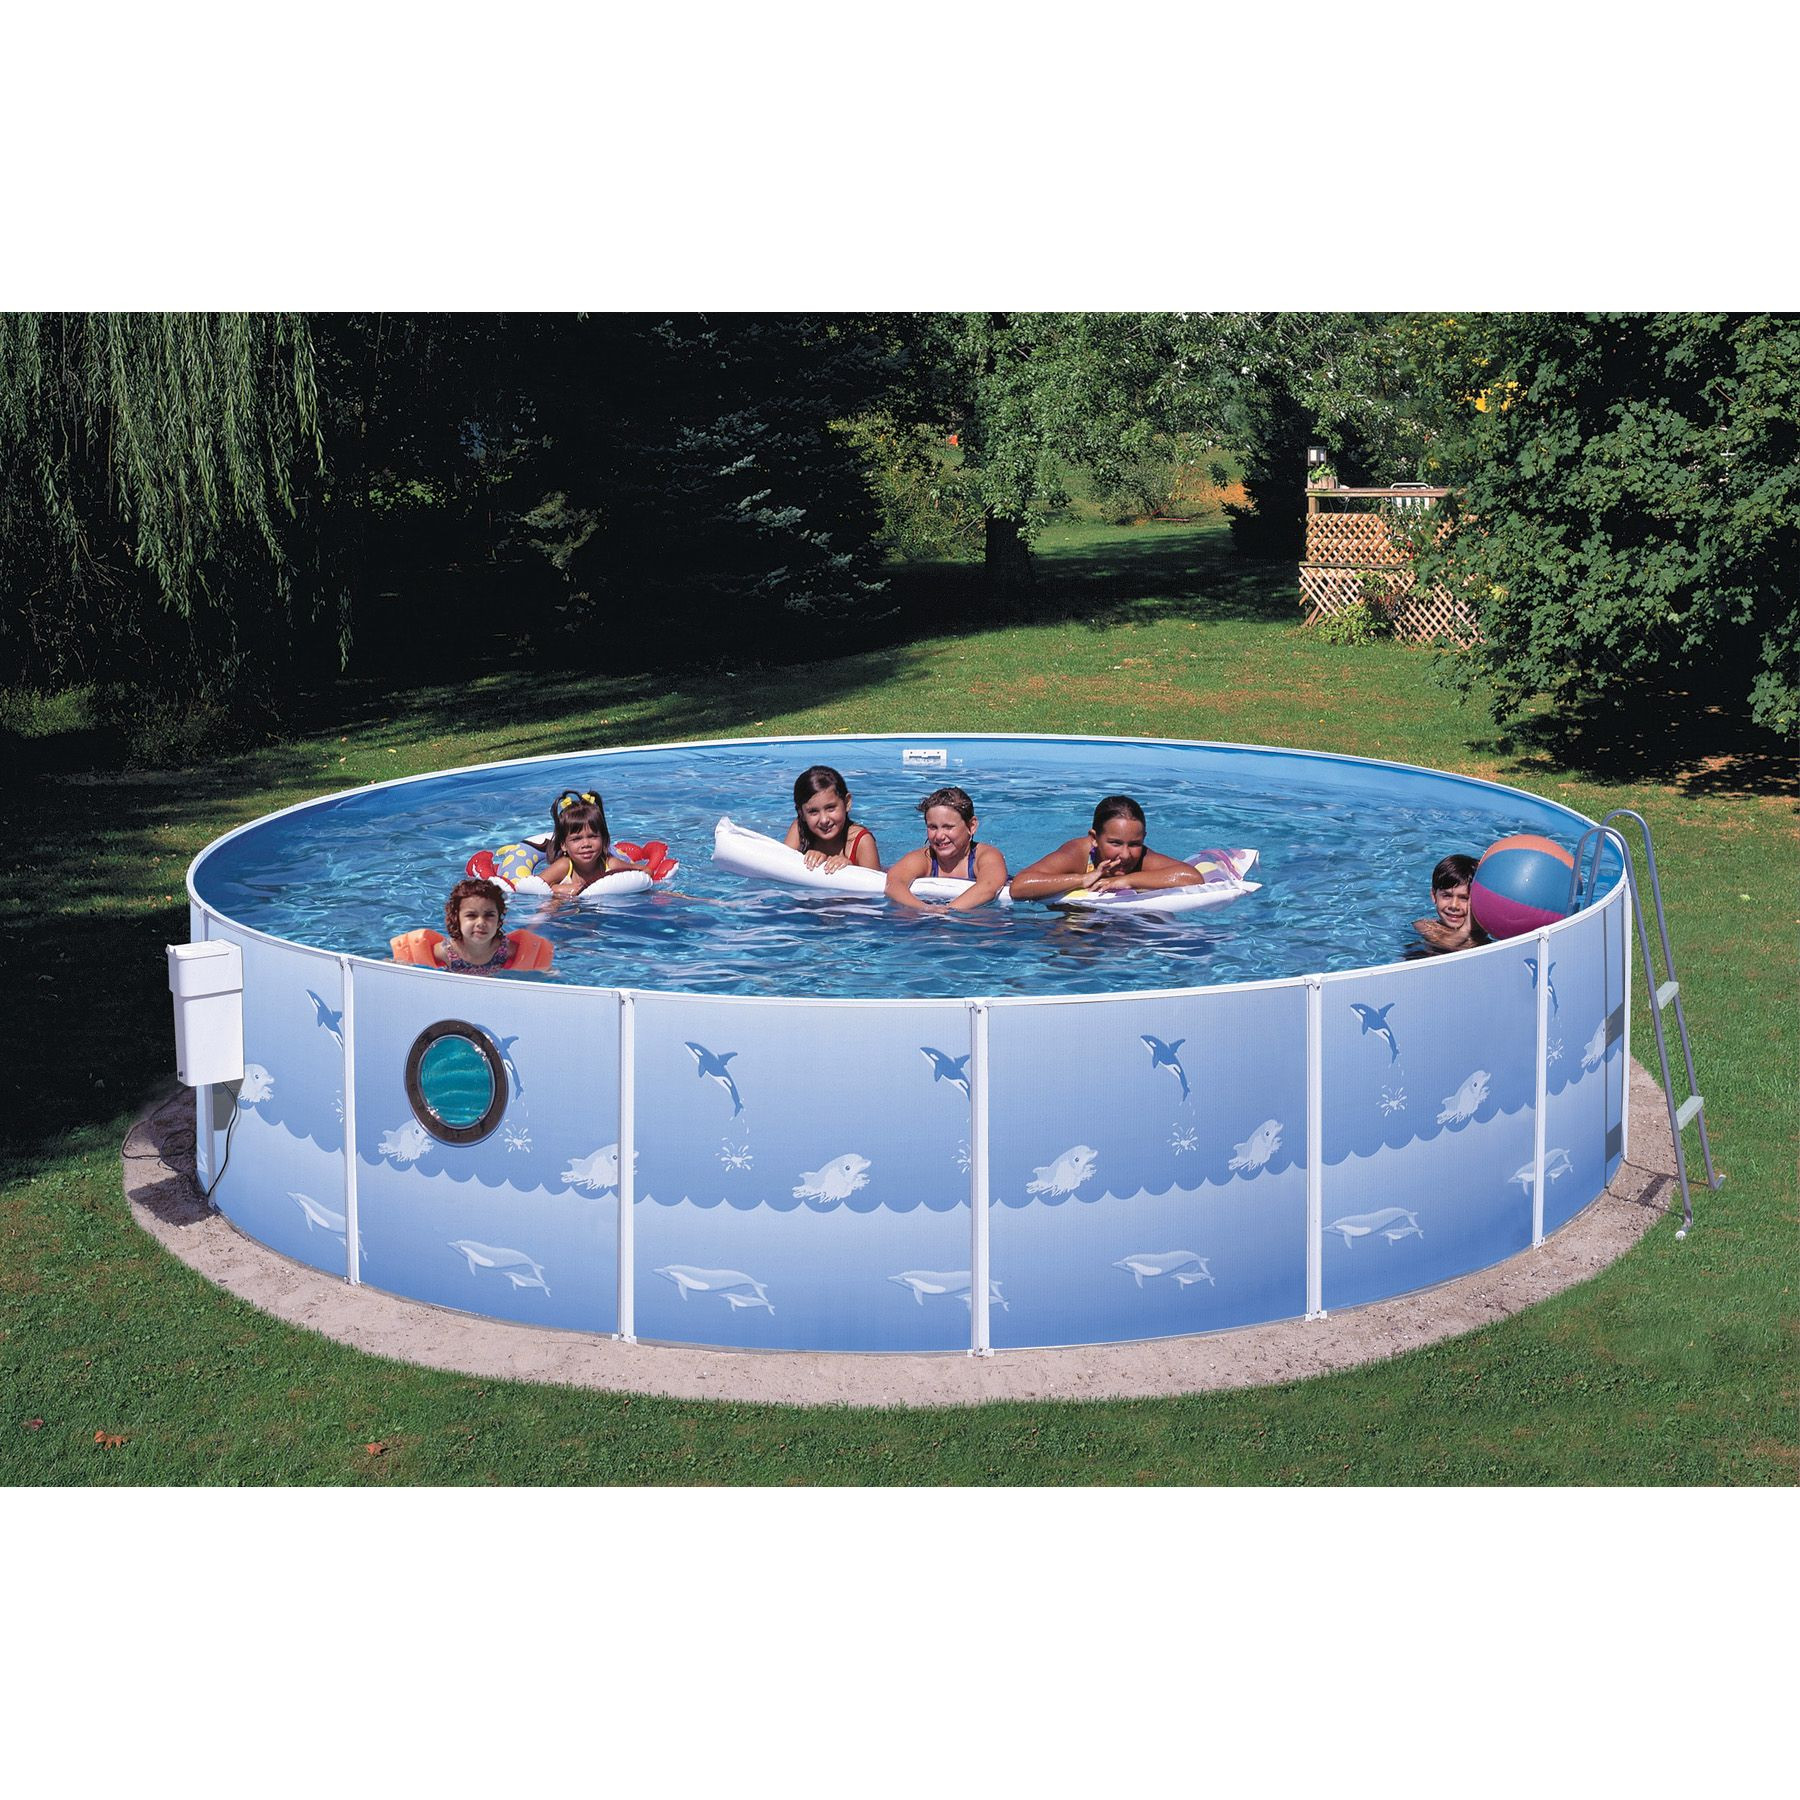 Backyard Pool Superstore Coupons
 Heritage Pools 12 ft x 36 in Ground Swimming Pool